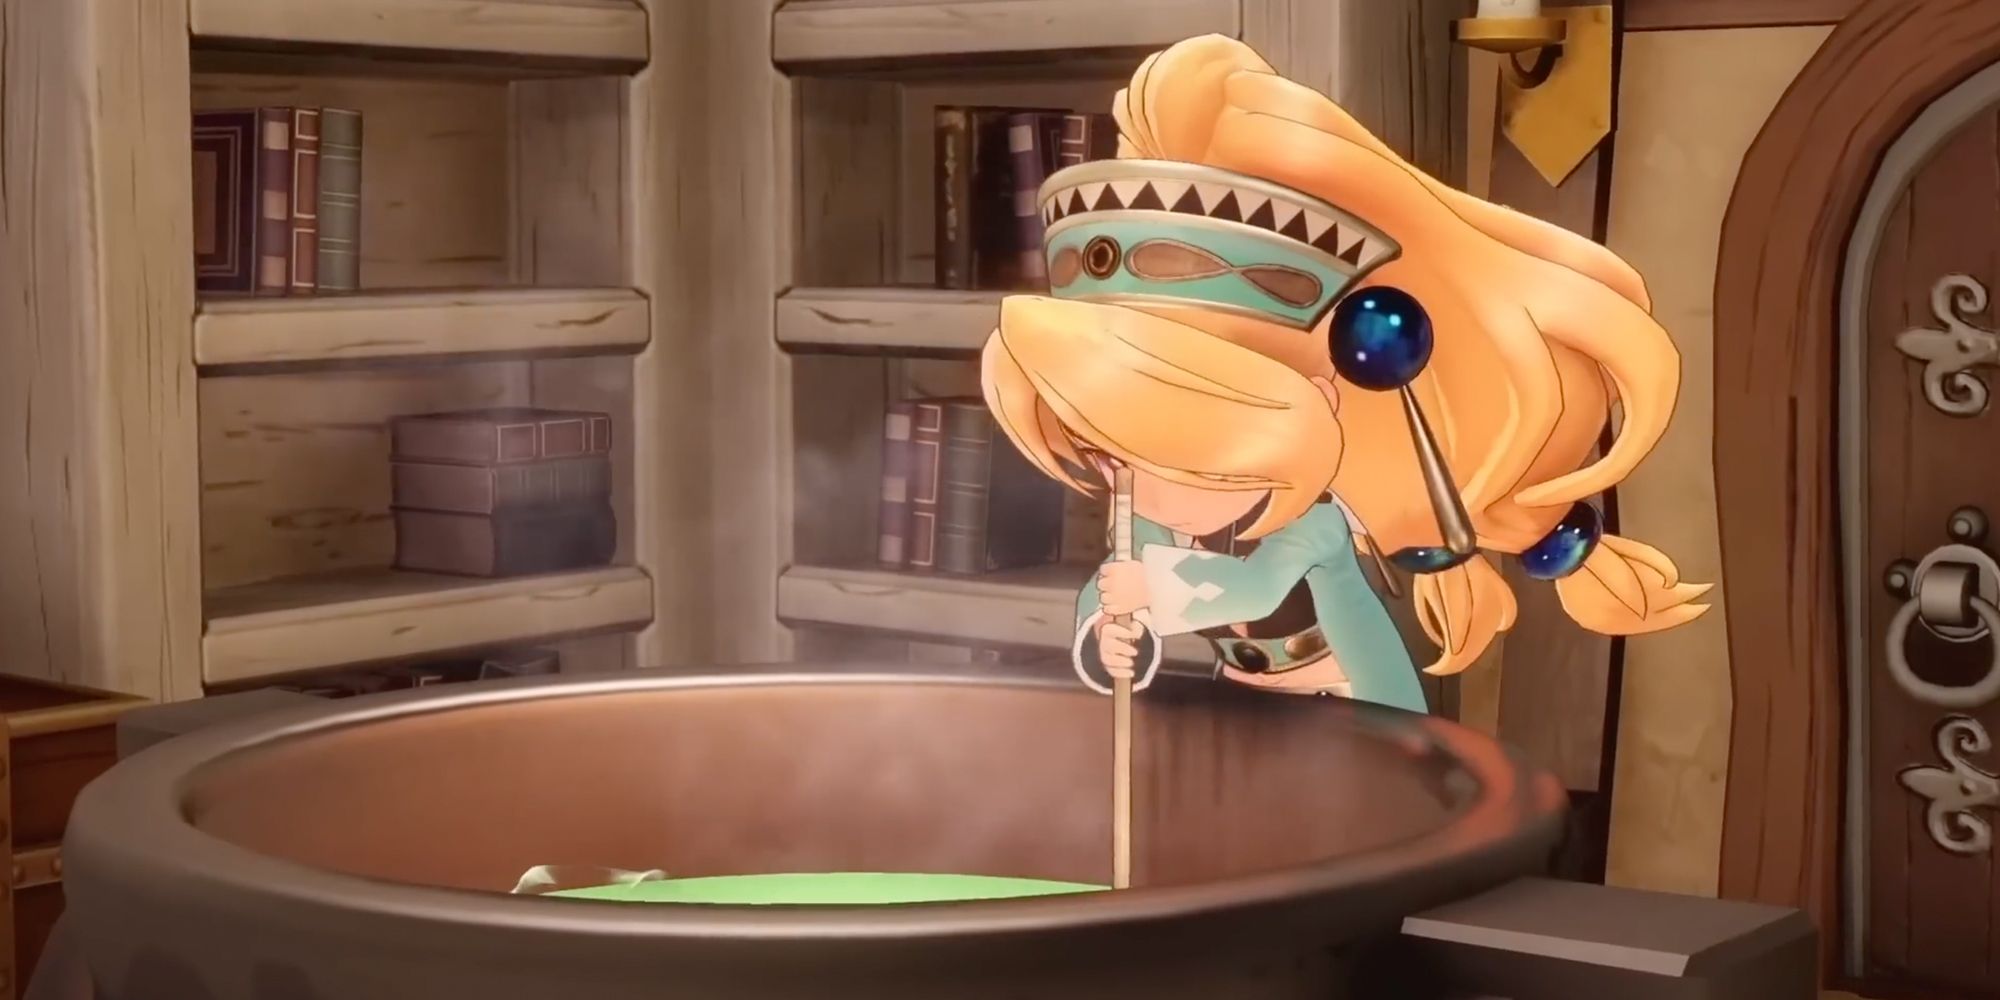 Marie of the upcoming RPG Atelier Marie Remake stirs a large cauldron